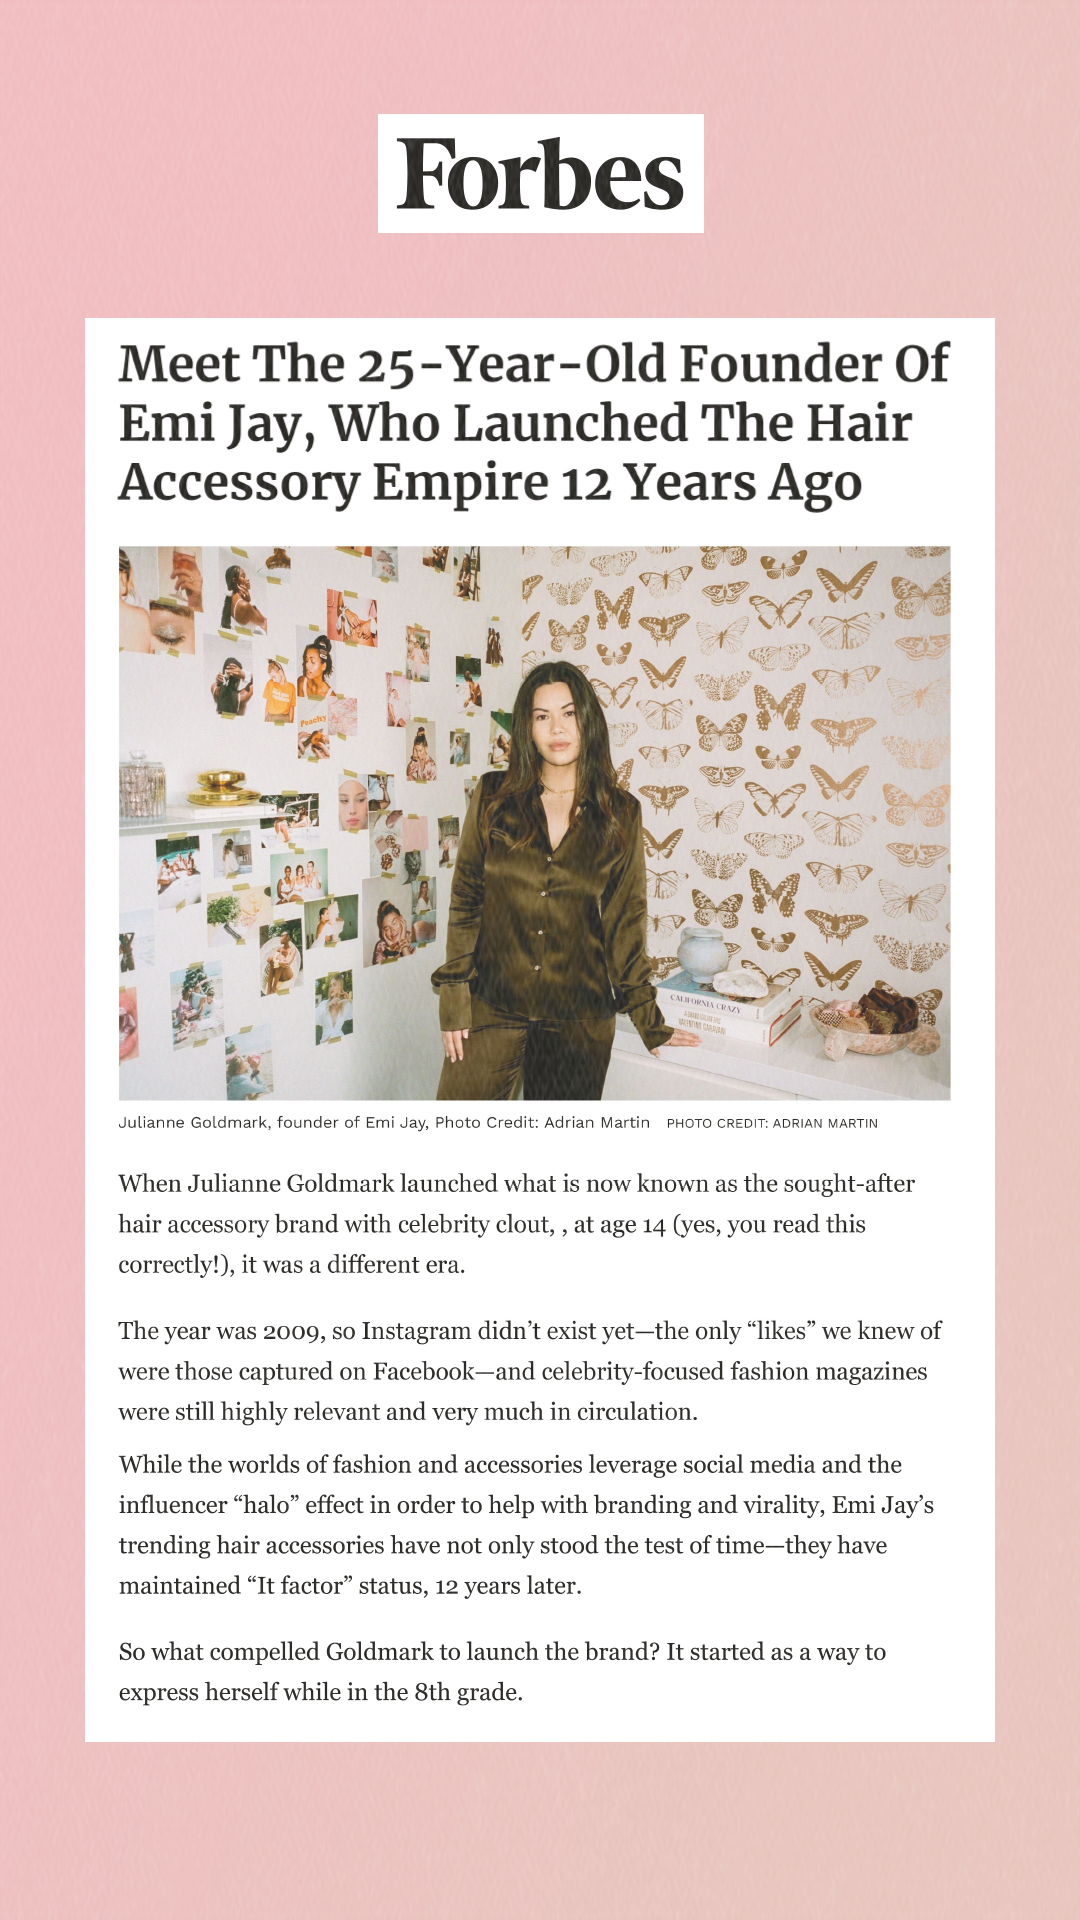 Meet The 25-Year-Old Founder Of Emi Jay, Who Launched The Hair Accessory Empire 12 Years Ago When Julianne Goldmark launched what is now known as the sought-after hair accessory brand with celebrity clout, , at age 14 (yes, you read this correctly!), it was a different era. The year was 2009, so Instagram didn’t exist yet—the only likes we knew of were those captured on Facebook—and celebrity-focused fashion magazines were still highly relevant and very much in circulation. While the worlds of fashion and accessories leverage social media and the influencer “halo” effect in order to help with branding and virality, Emi Jay’s trending hair accessories have not only stood the test of time—they have maintained It factor status, 12 years later. So what compelled Goldmark to launch the brand? It started as a way to express herself while in the 8th grade.